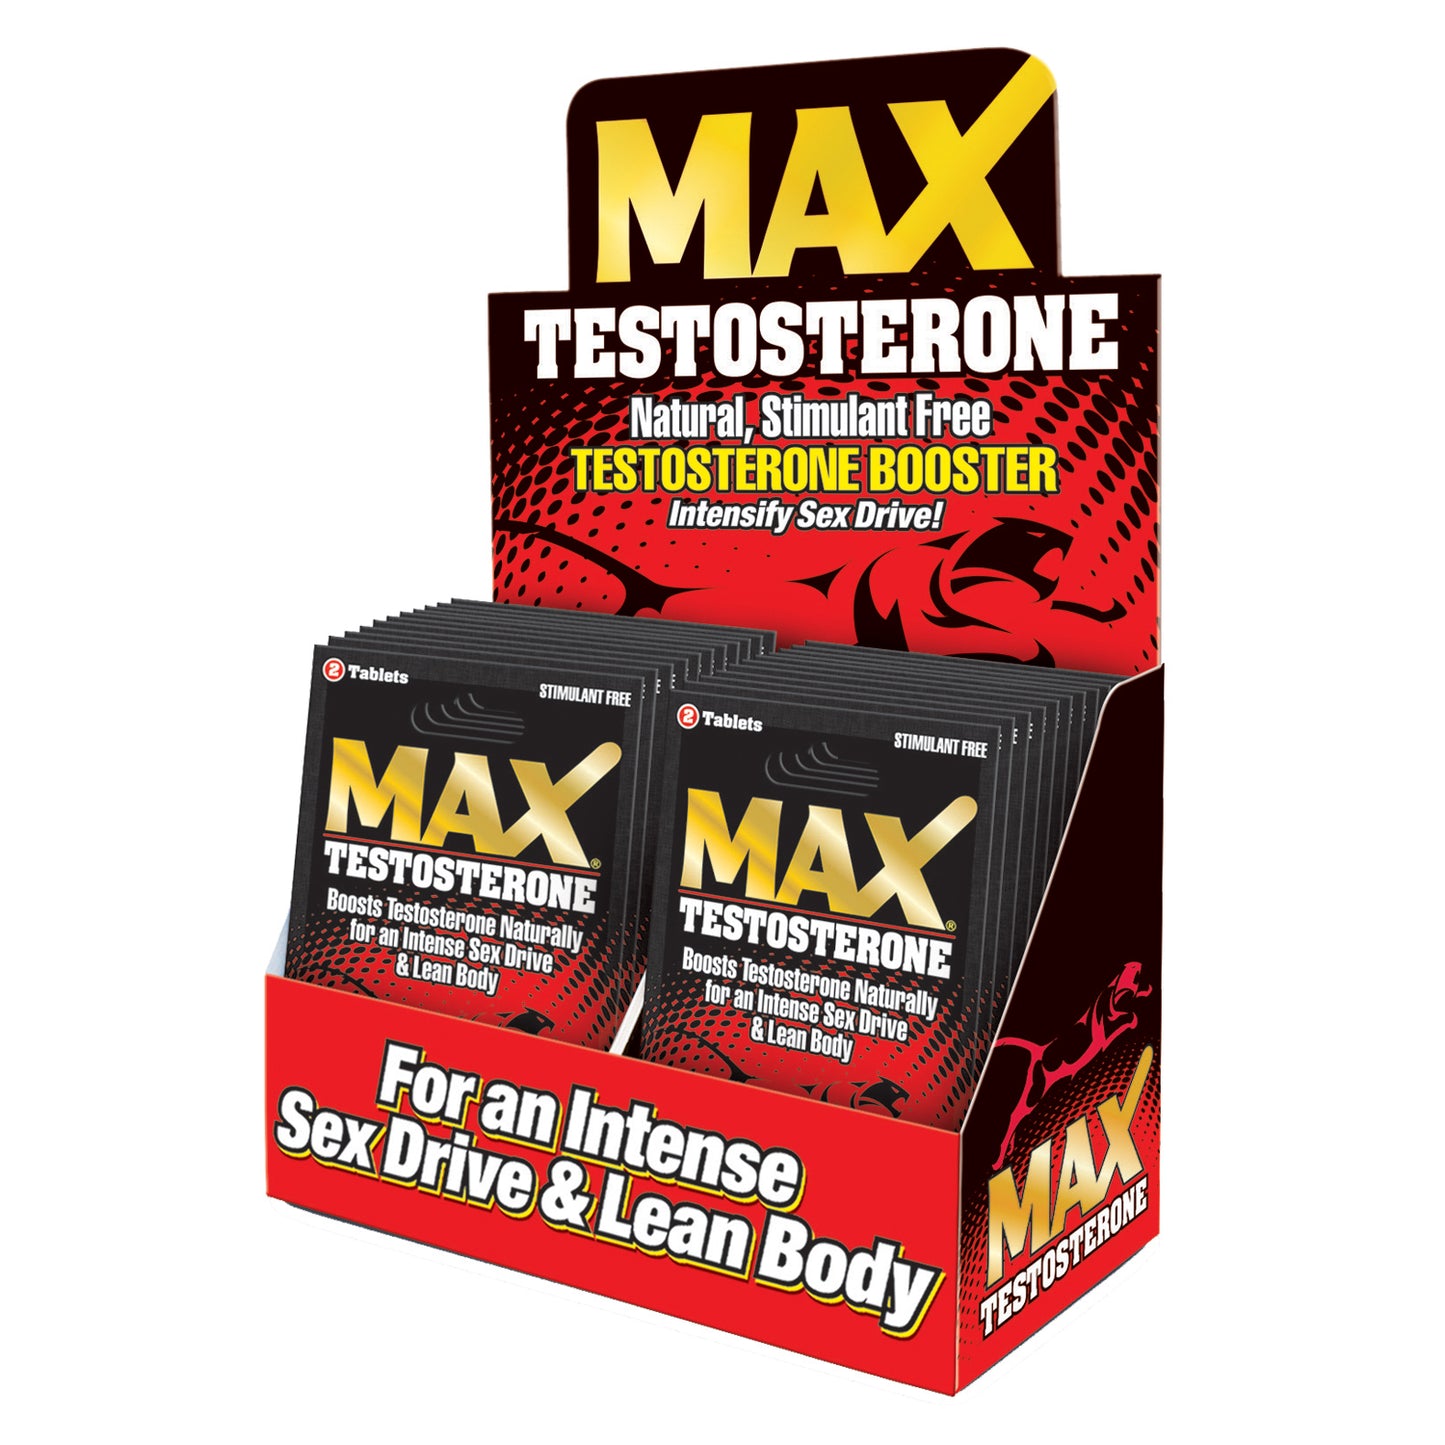 Max Testosterone - 24 Count Display - 2 Count Packets